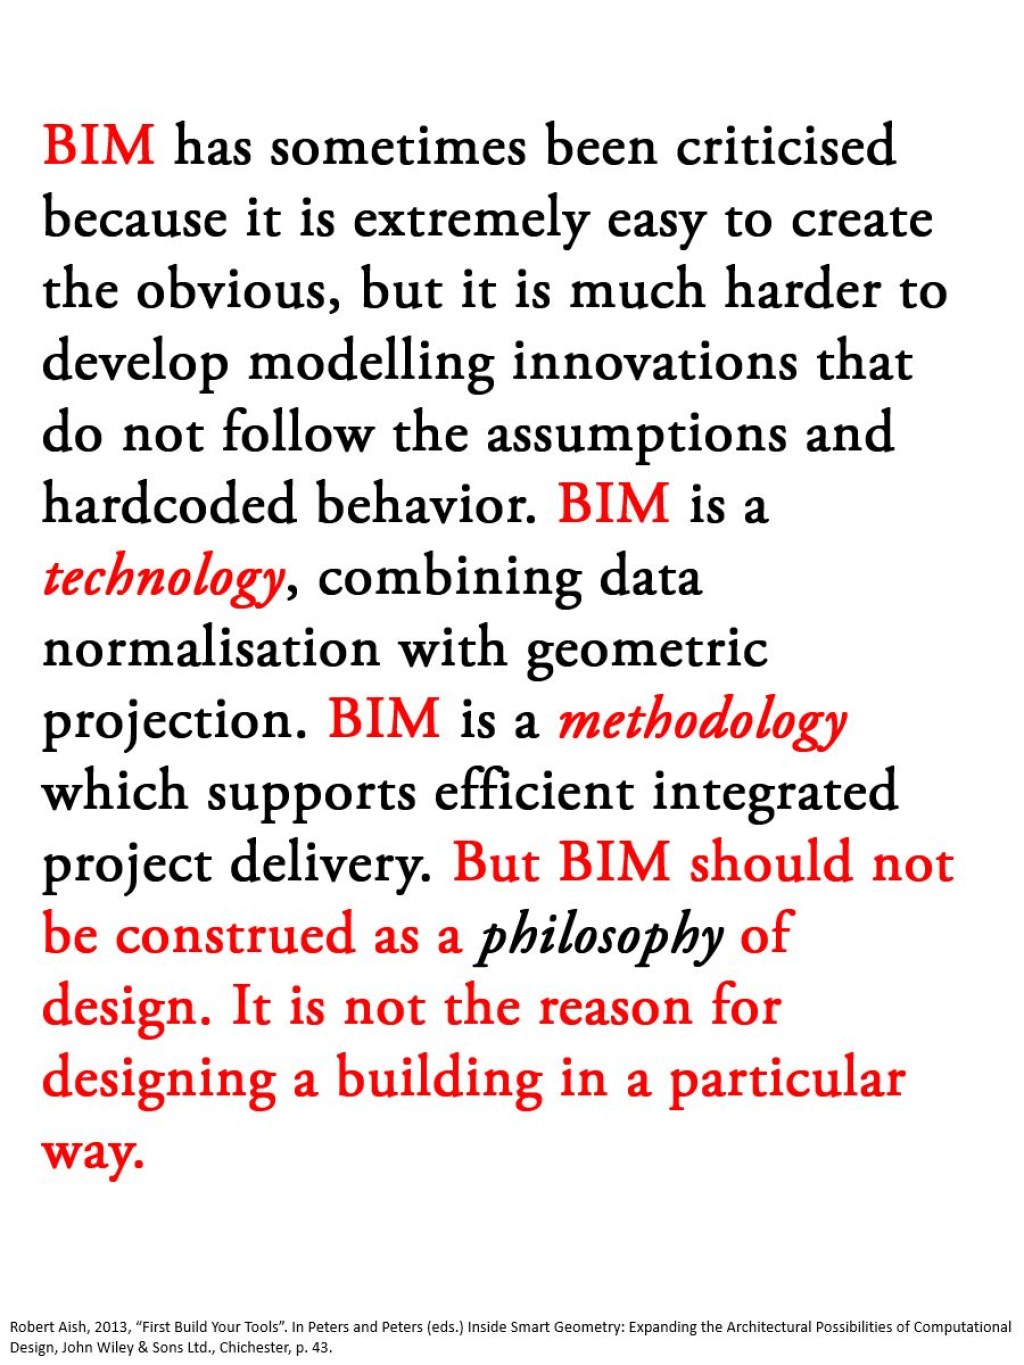 Picture of: Good observation by Robert Aish about the role of BIM